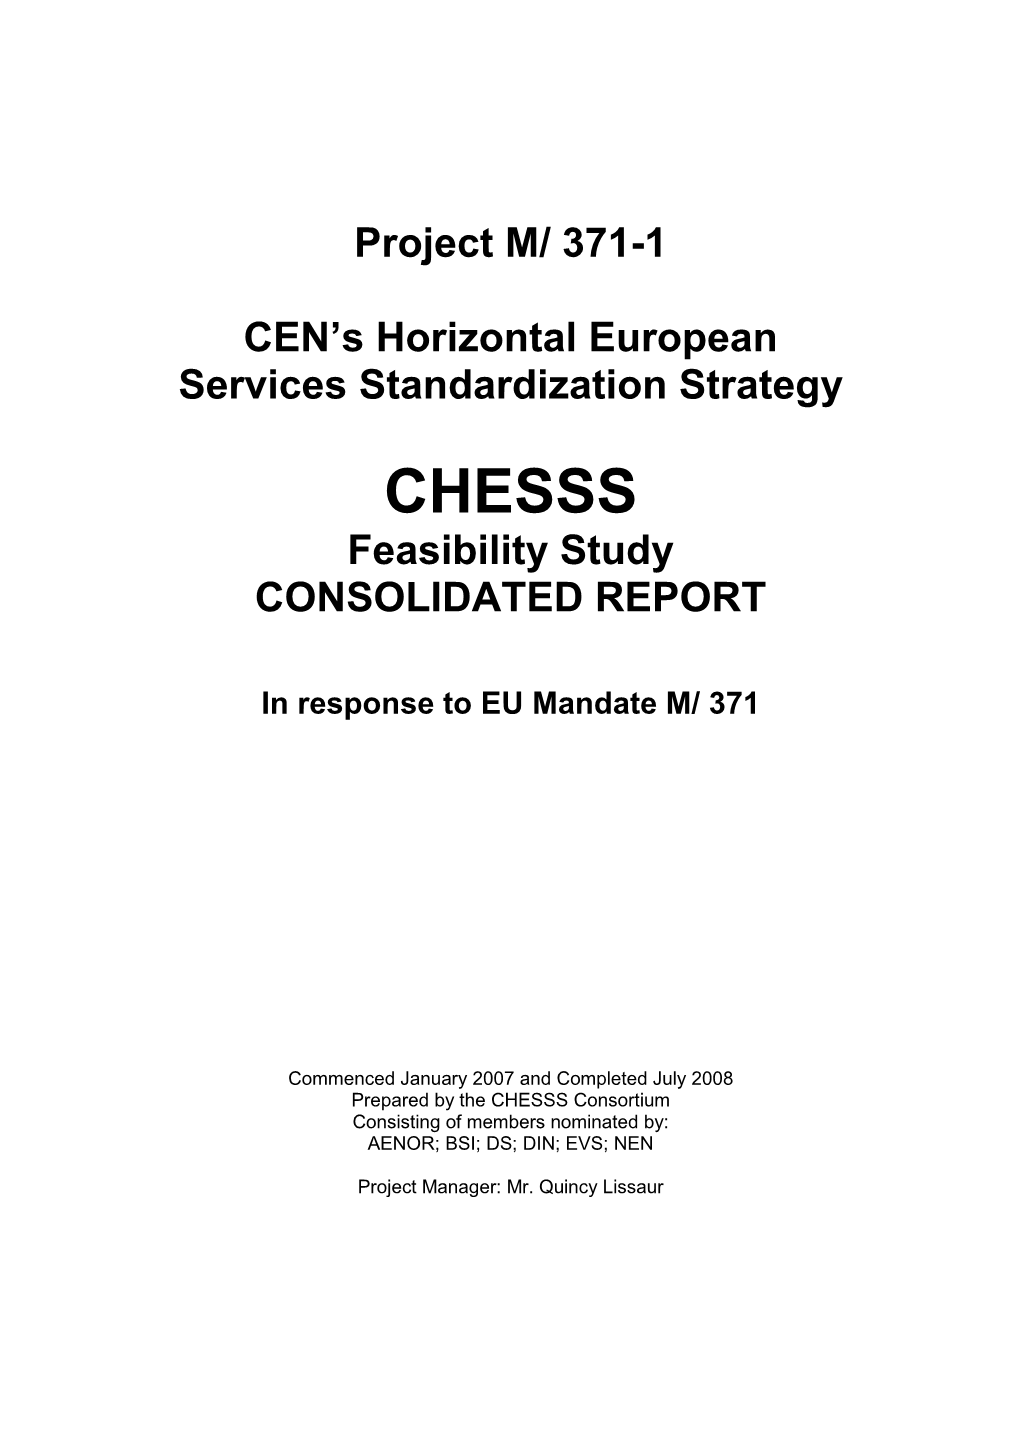 CHESSS Feasibility Study CONSOLIDATED REPORT